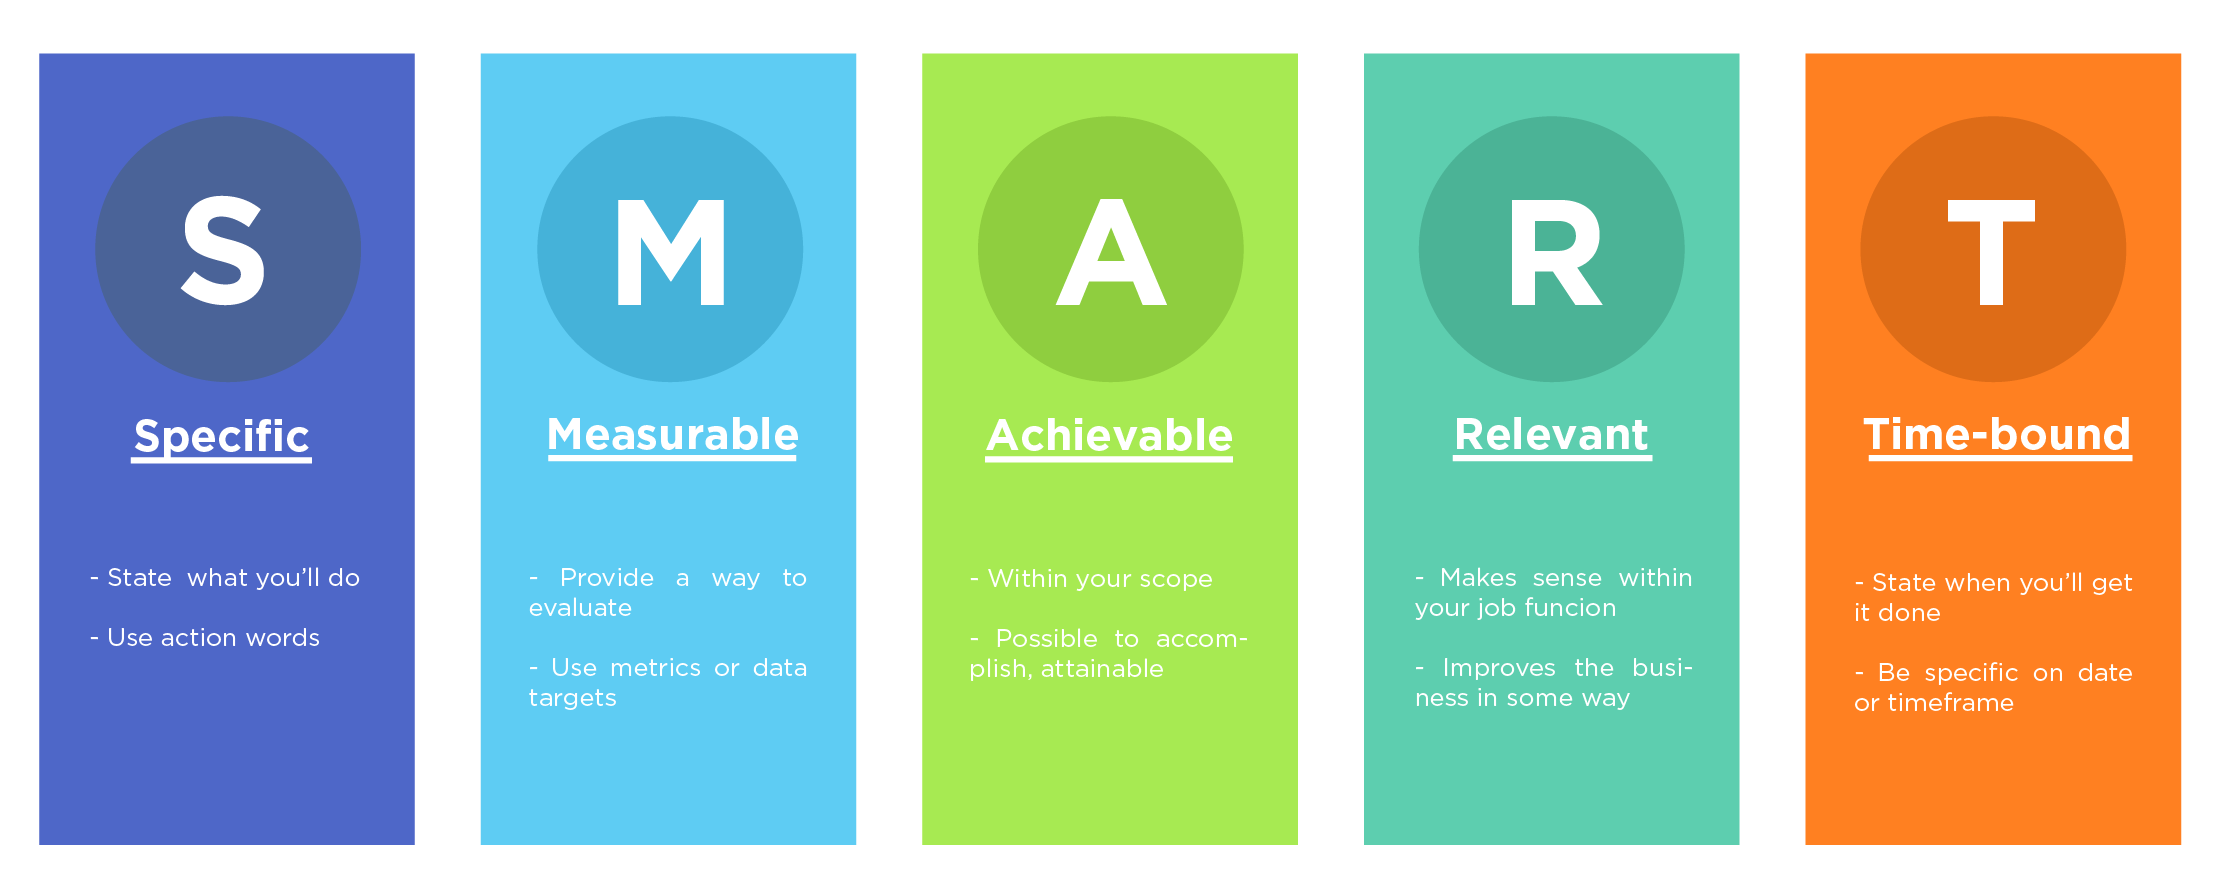 SMART-Smart Goals Examples-Tips from Pros image, acronym